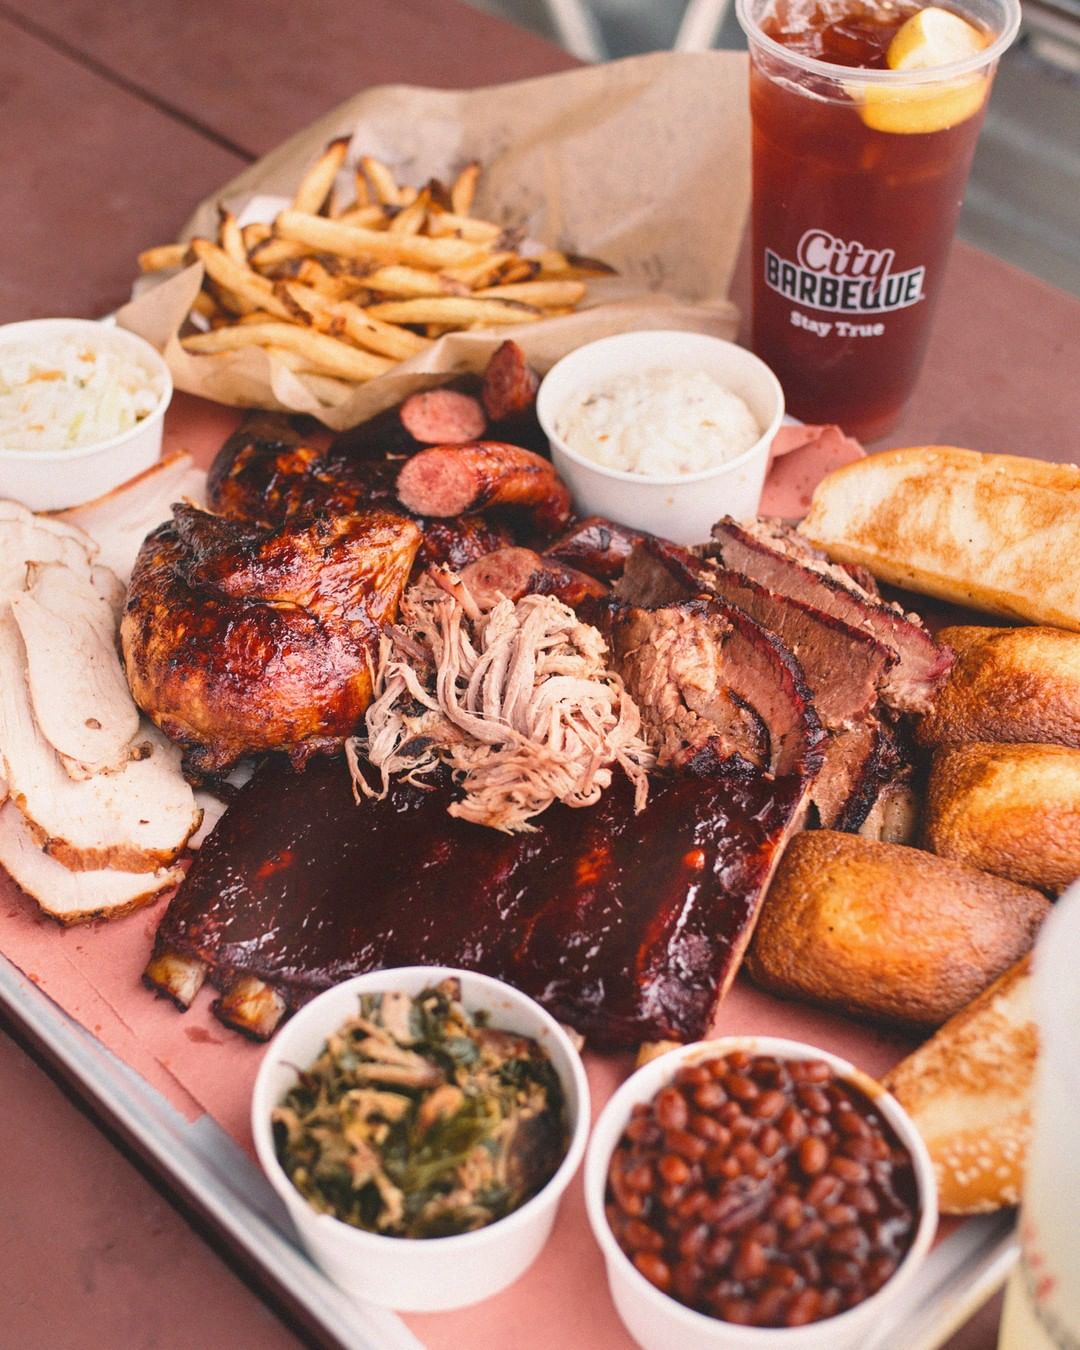 Overhead view of large tray of barbeque meats, cornbread, sides, and a glass of iced tea. Photo by Instagram user @citybbq